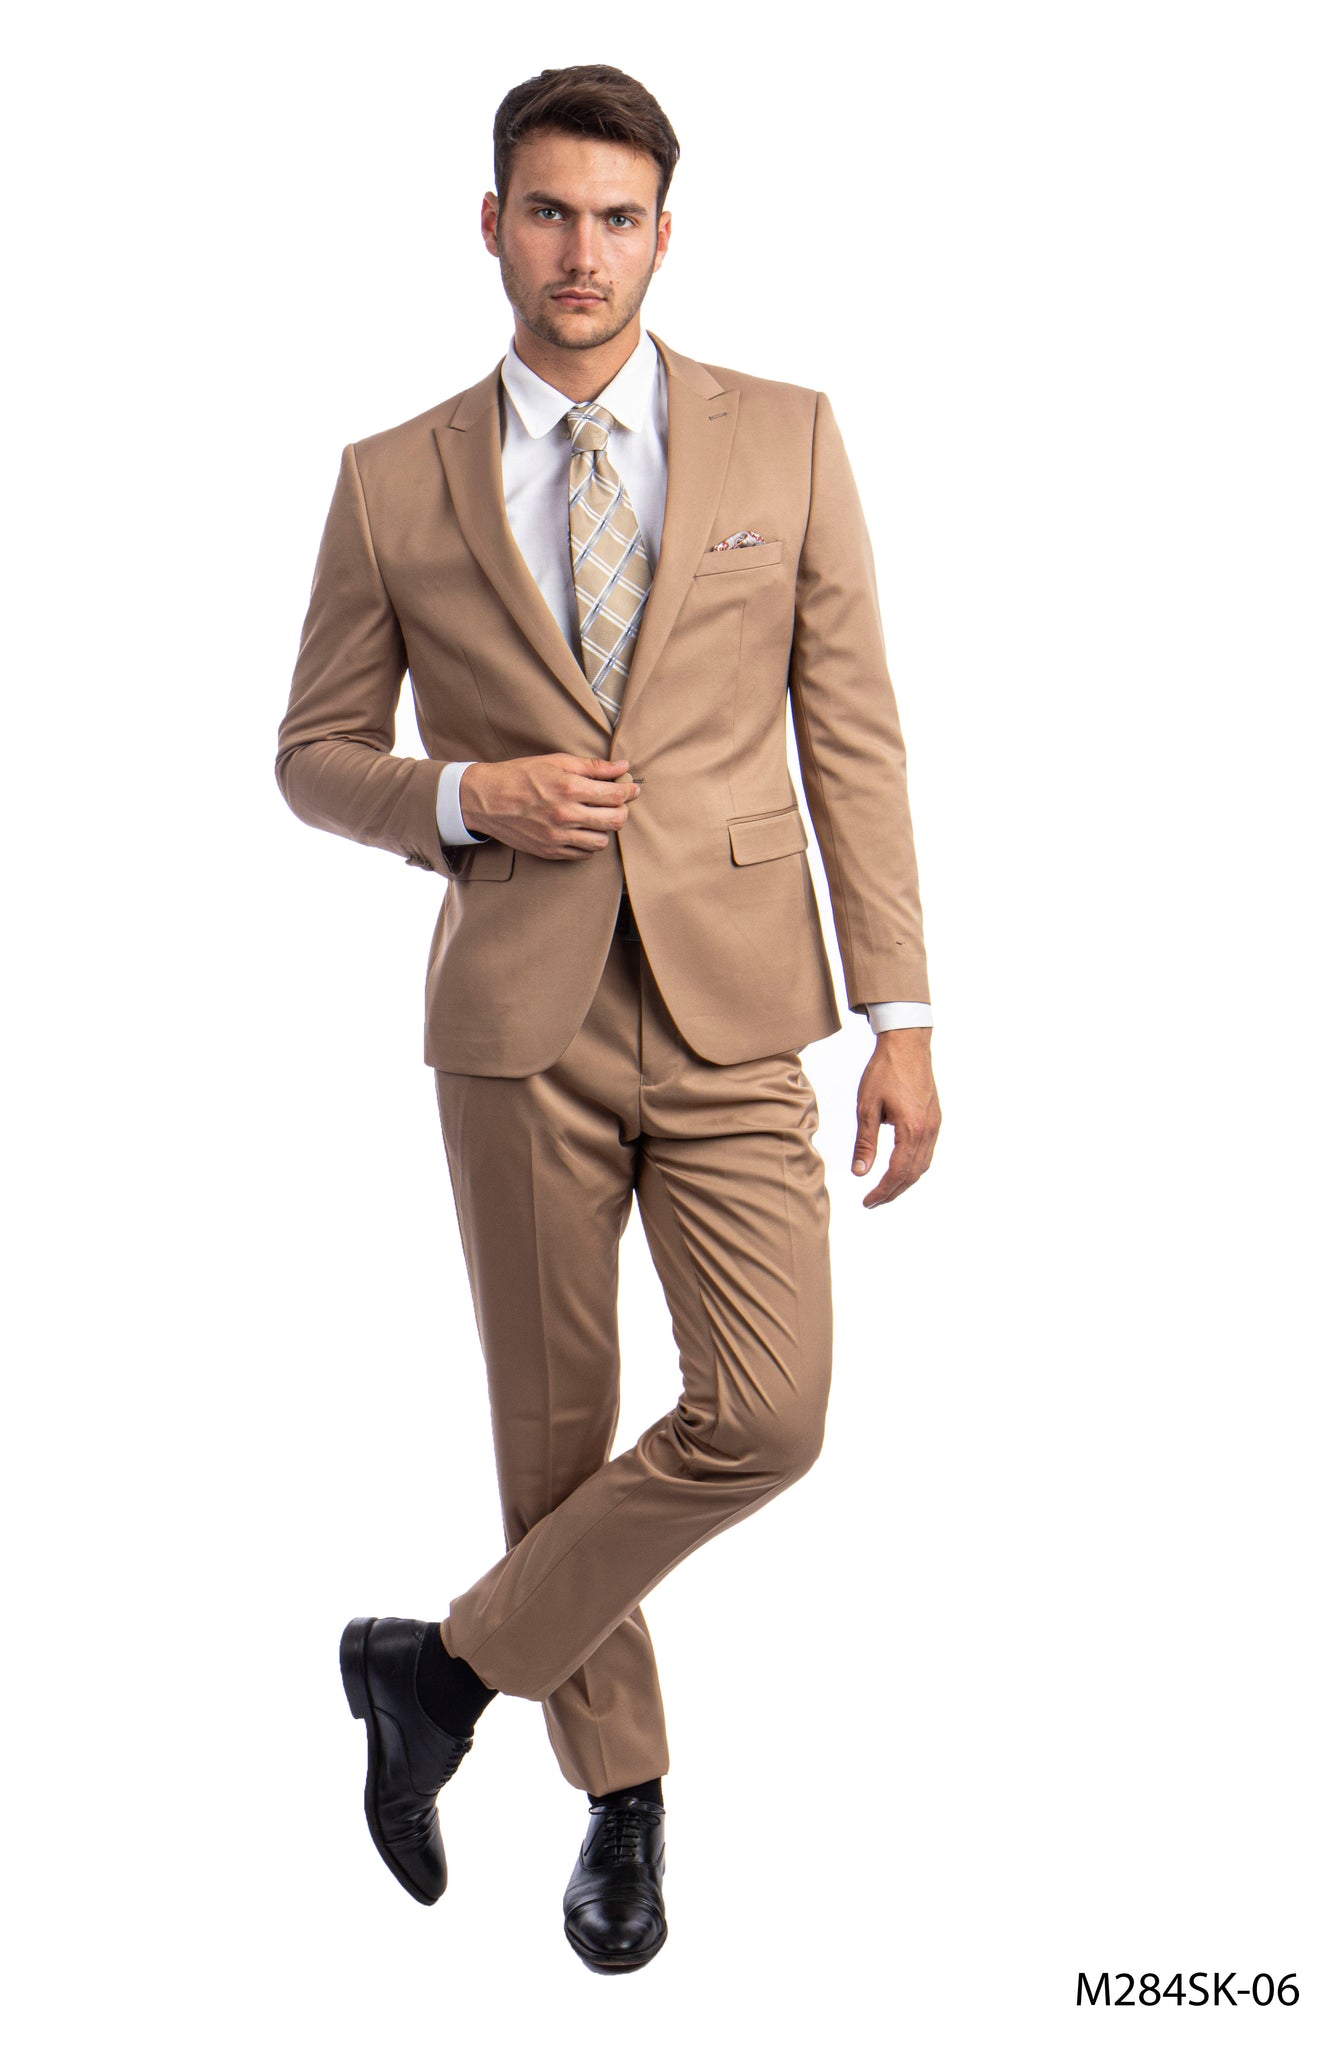 Dk.Taupe Suit For Men Formal Suits For All Ocassions